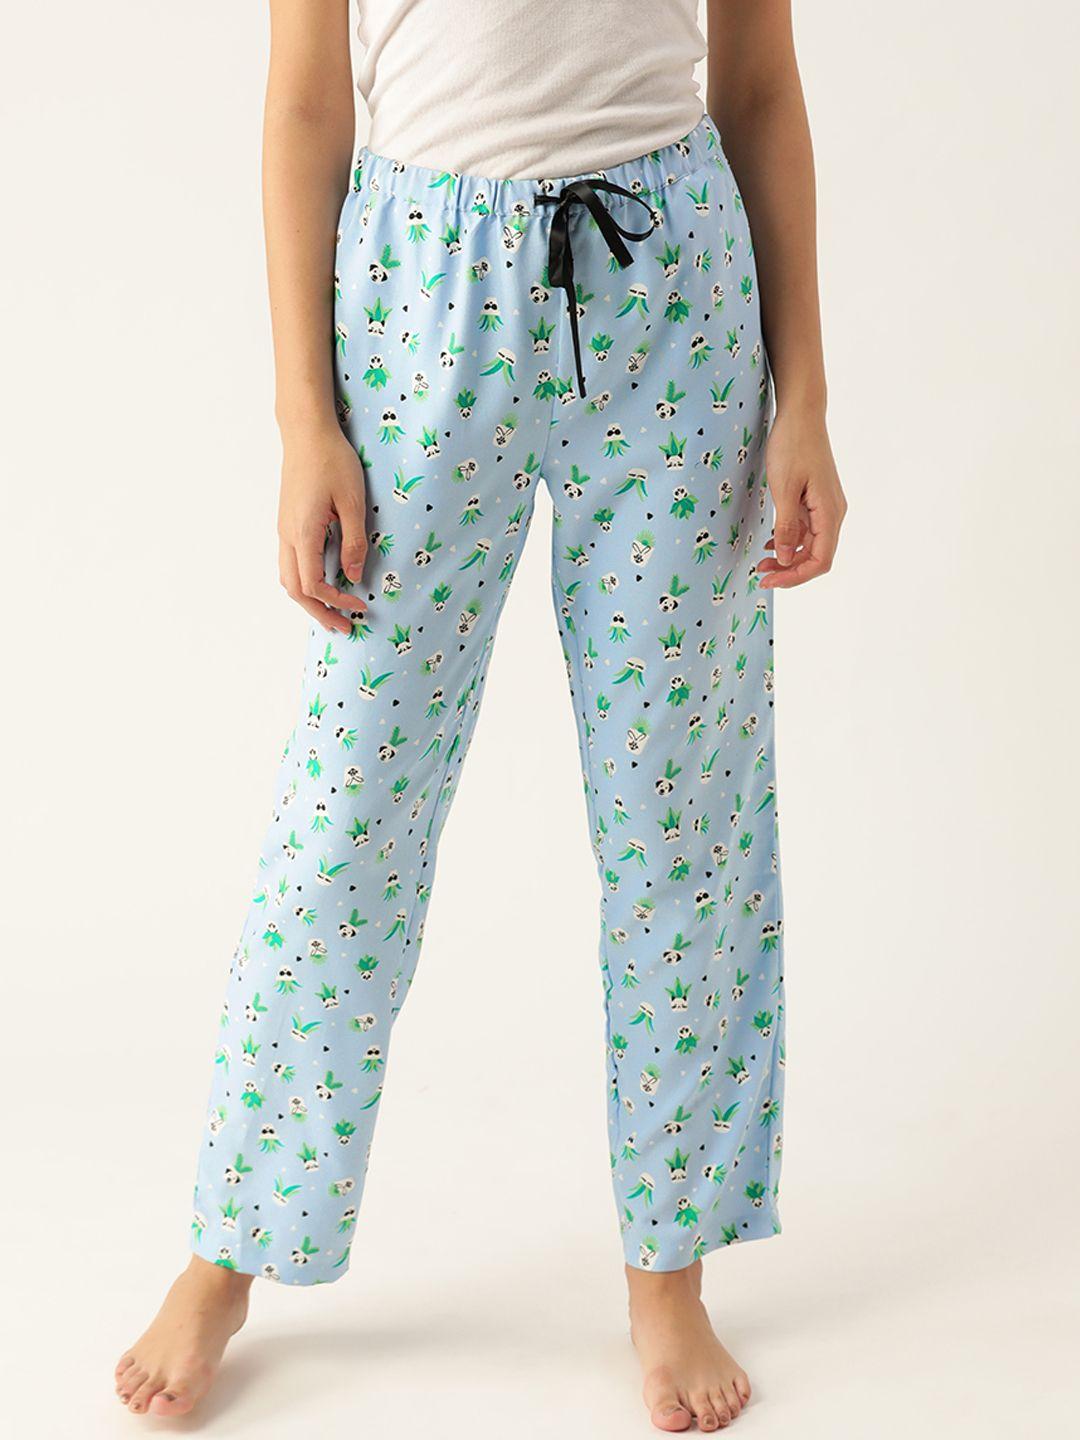 dressberry-women-blue-&-white-graphic-printed-lounge-pants